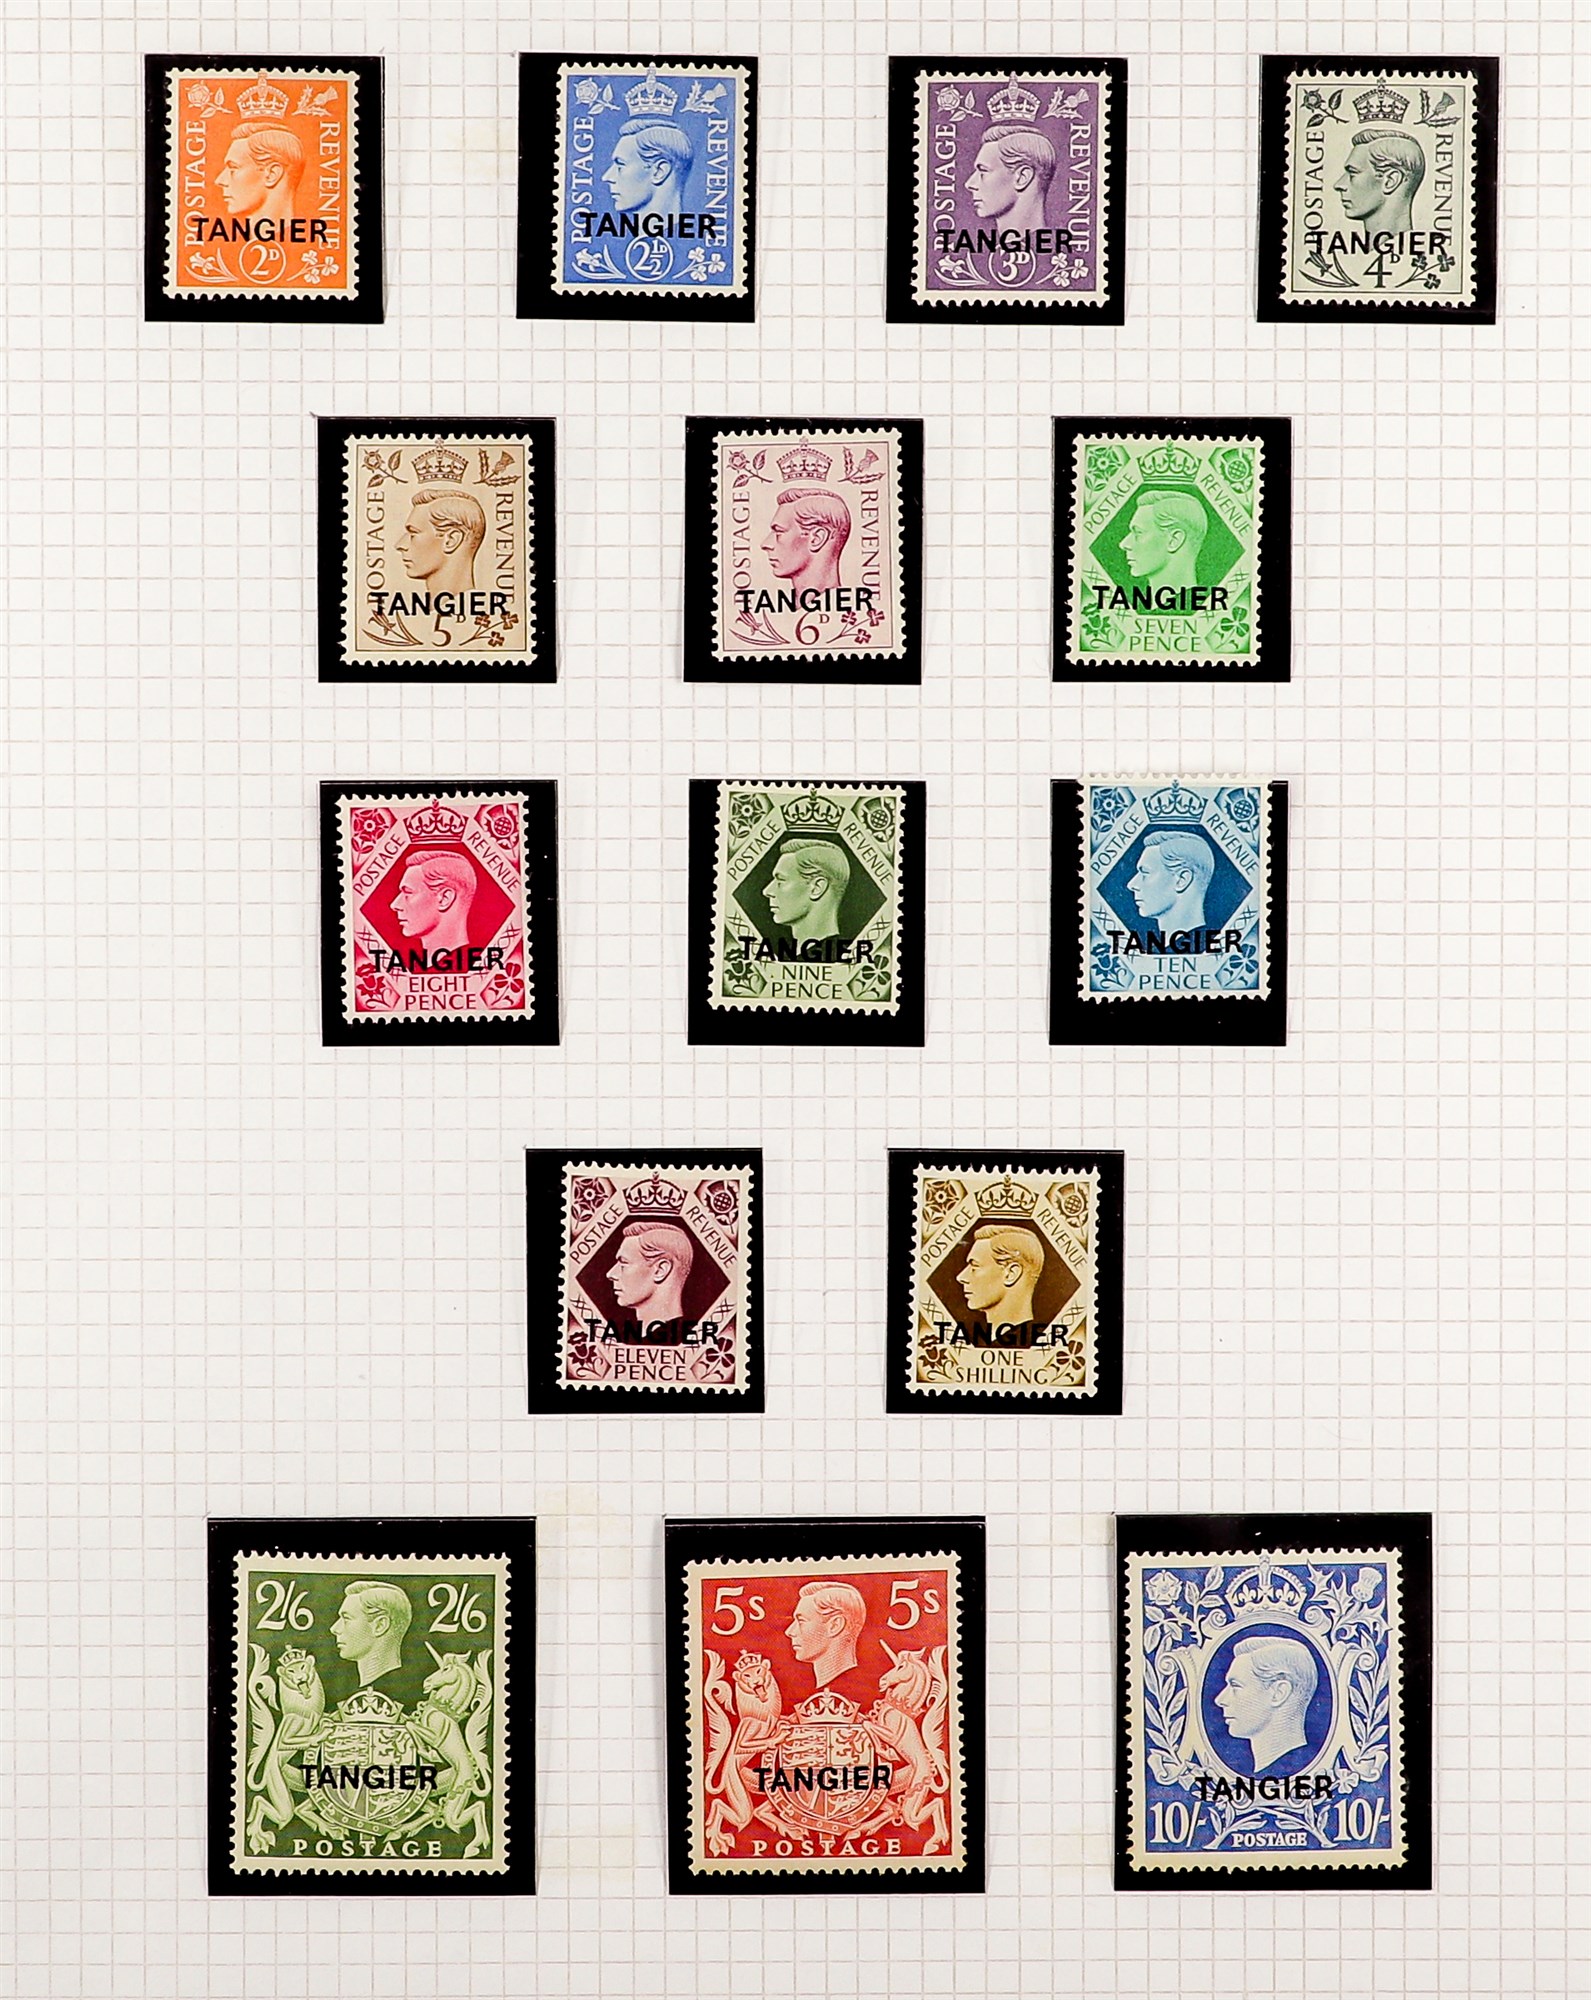 MOROCCO AGENCIES TANGIER 1927 - 1957 collection of mint and never hinged mint stamps, many sets, - Image 3 of 6